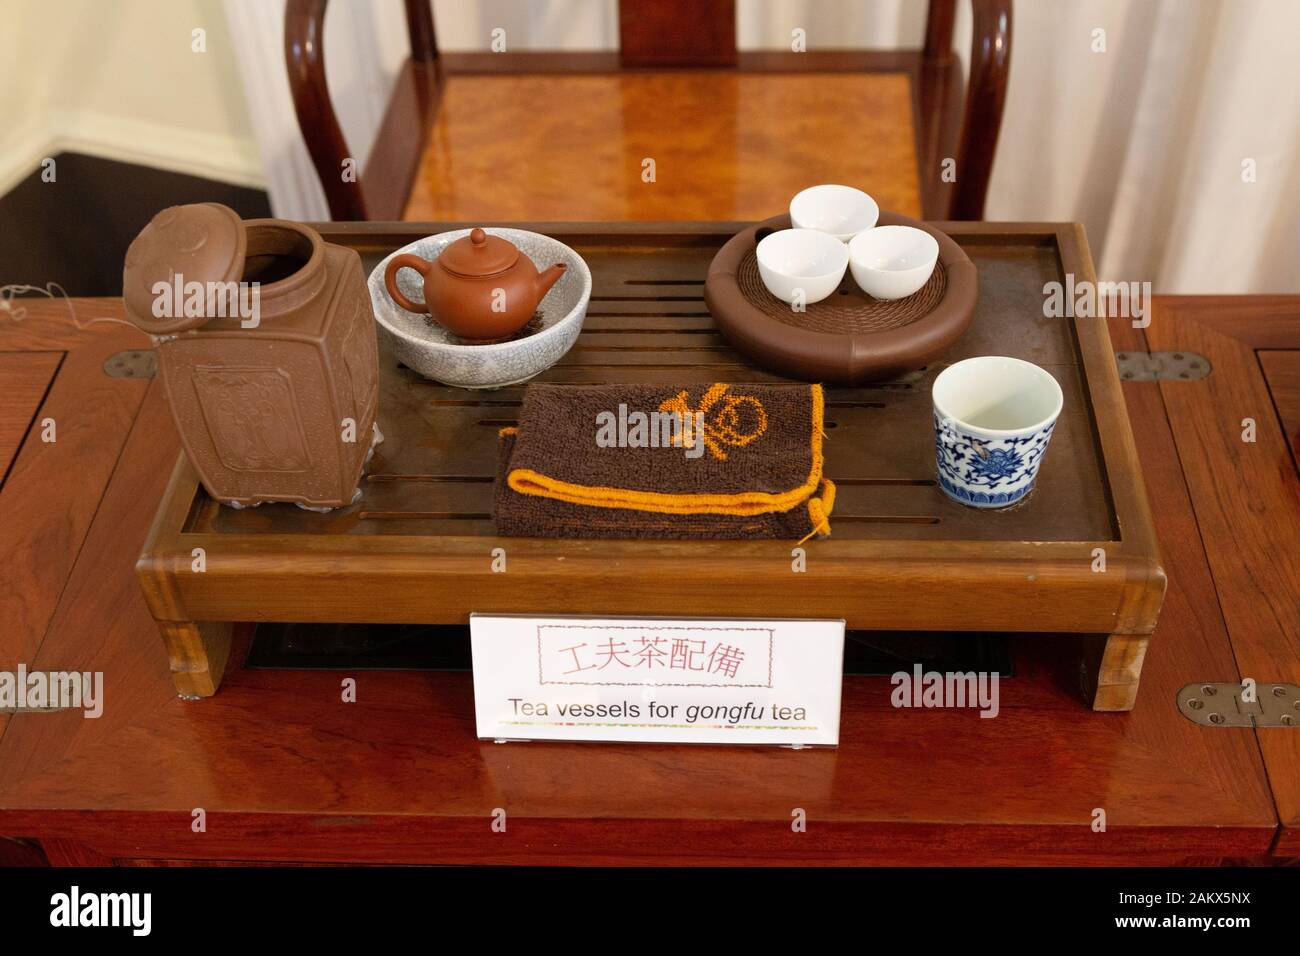 Museum of Teaware, exhibits of historic vintage teapots and teasets, inside the Museum of Teaware, Hong Kong Asia Stock Photo